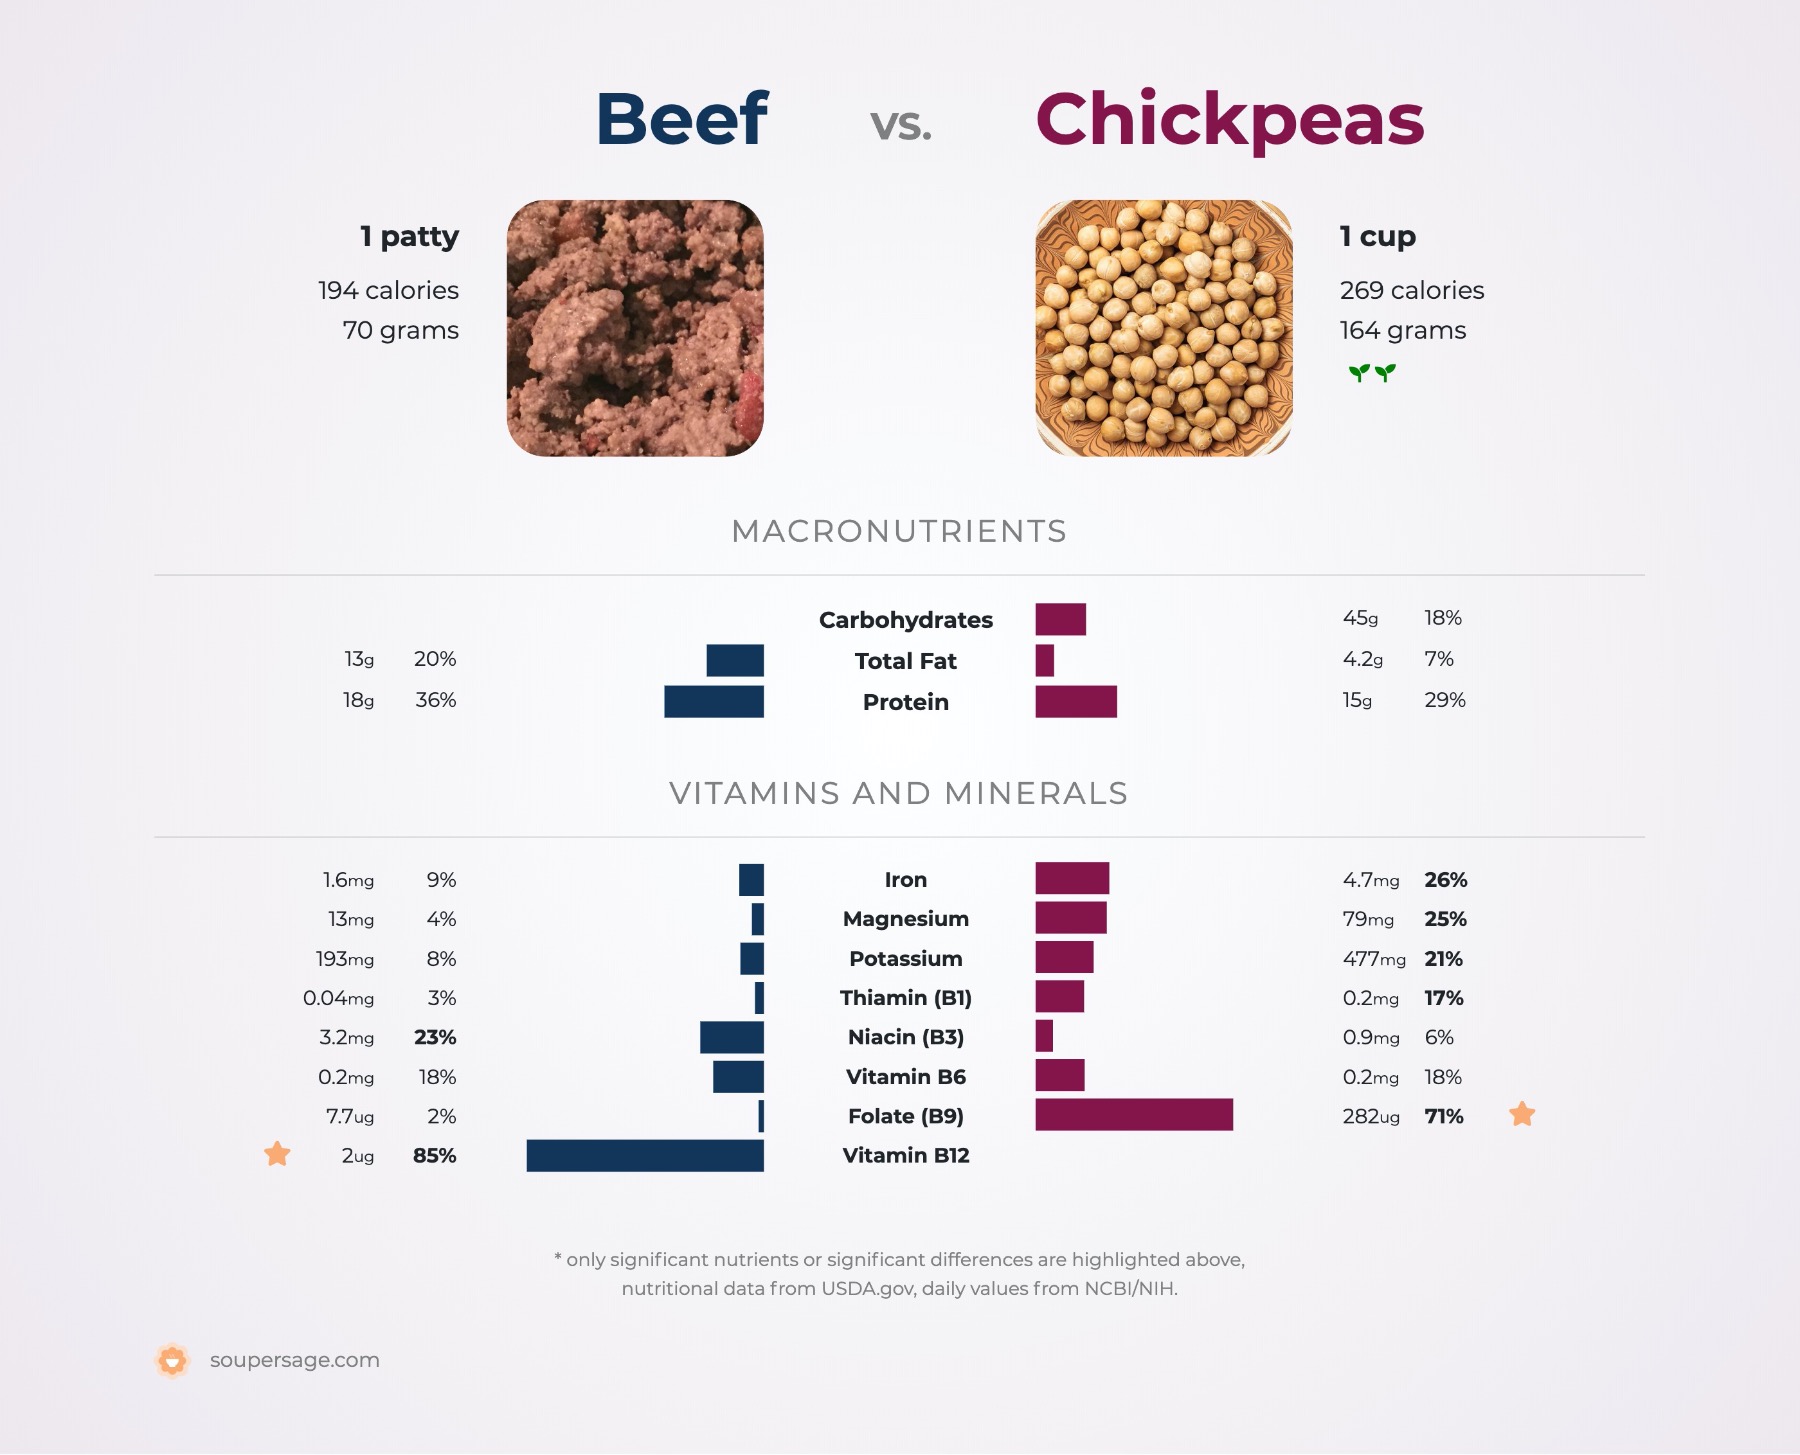 nutrition comparison of beef vs. chickpeas